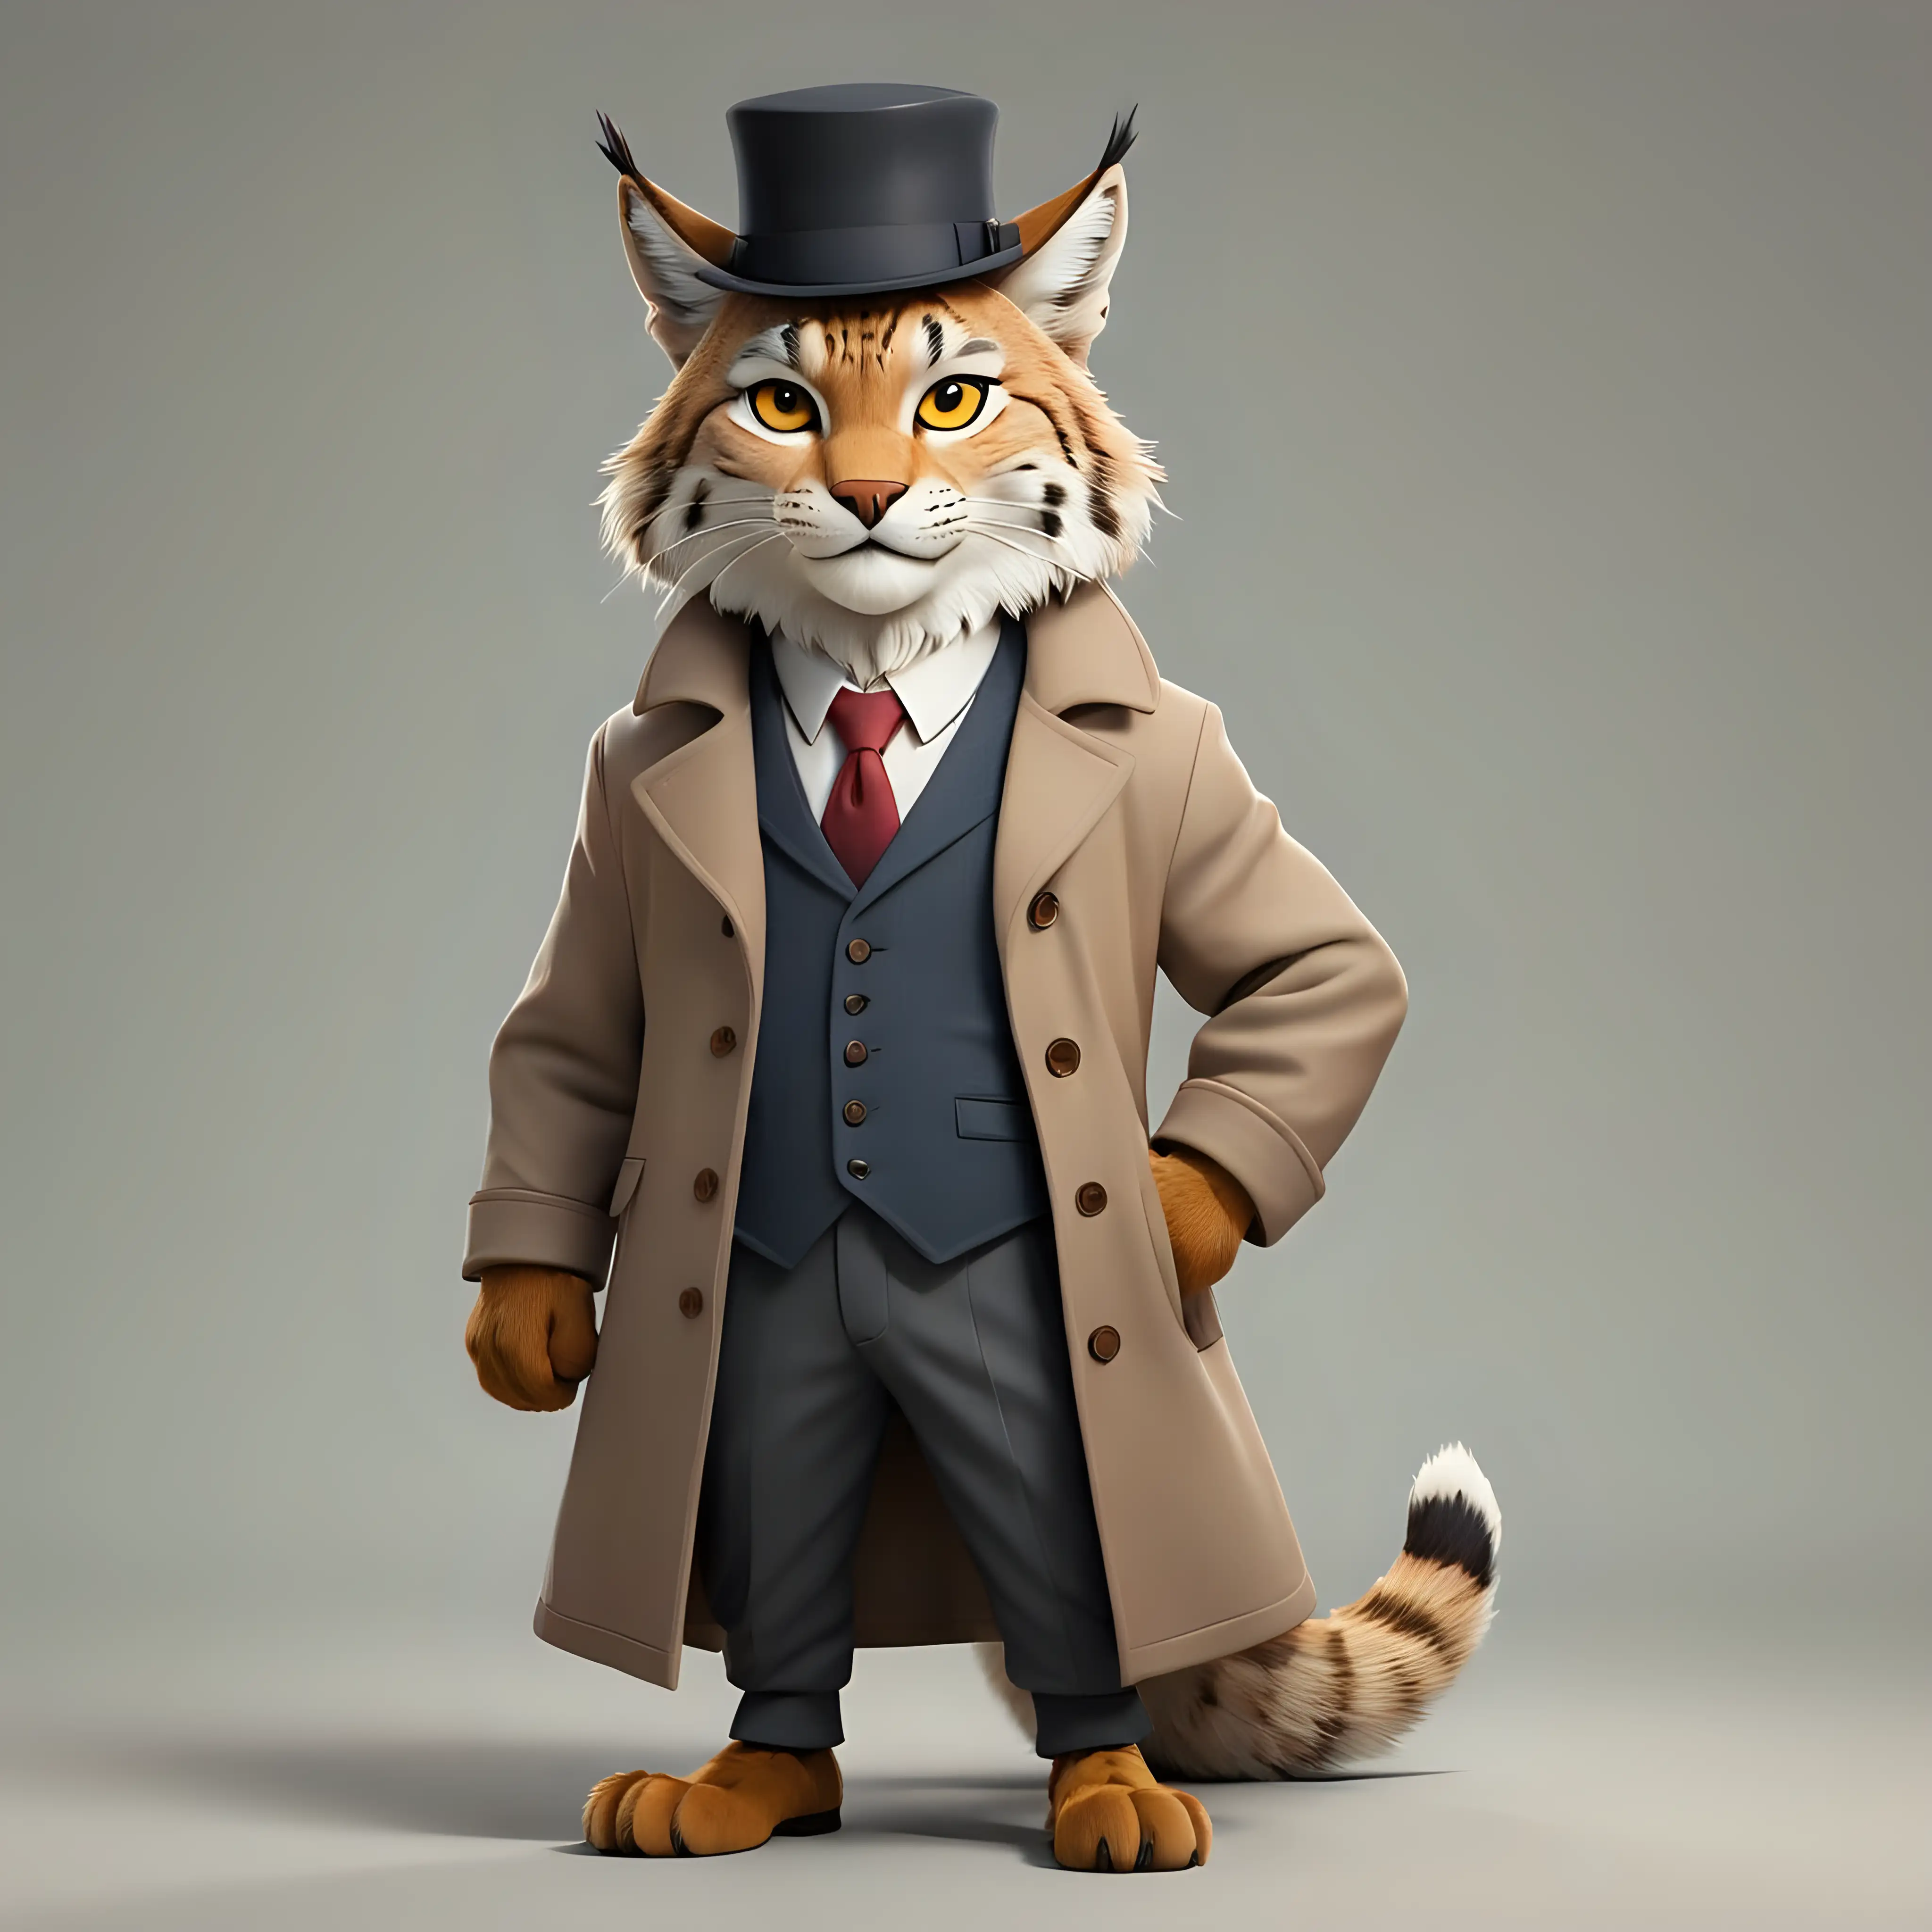 Cartoon Lynx Detective with Overcoat and Formal Hat